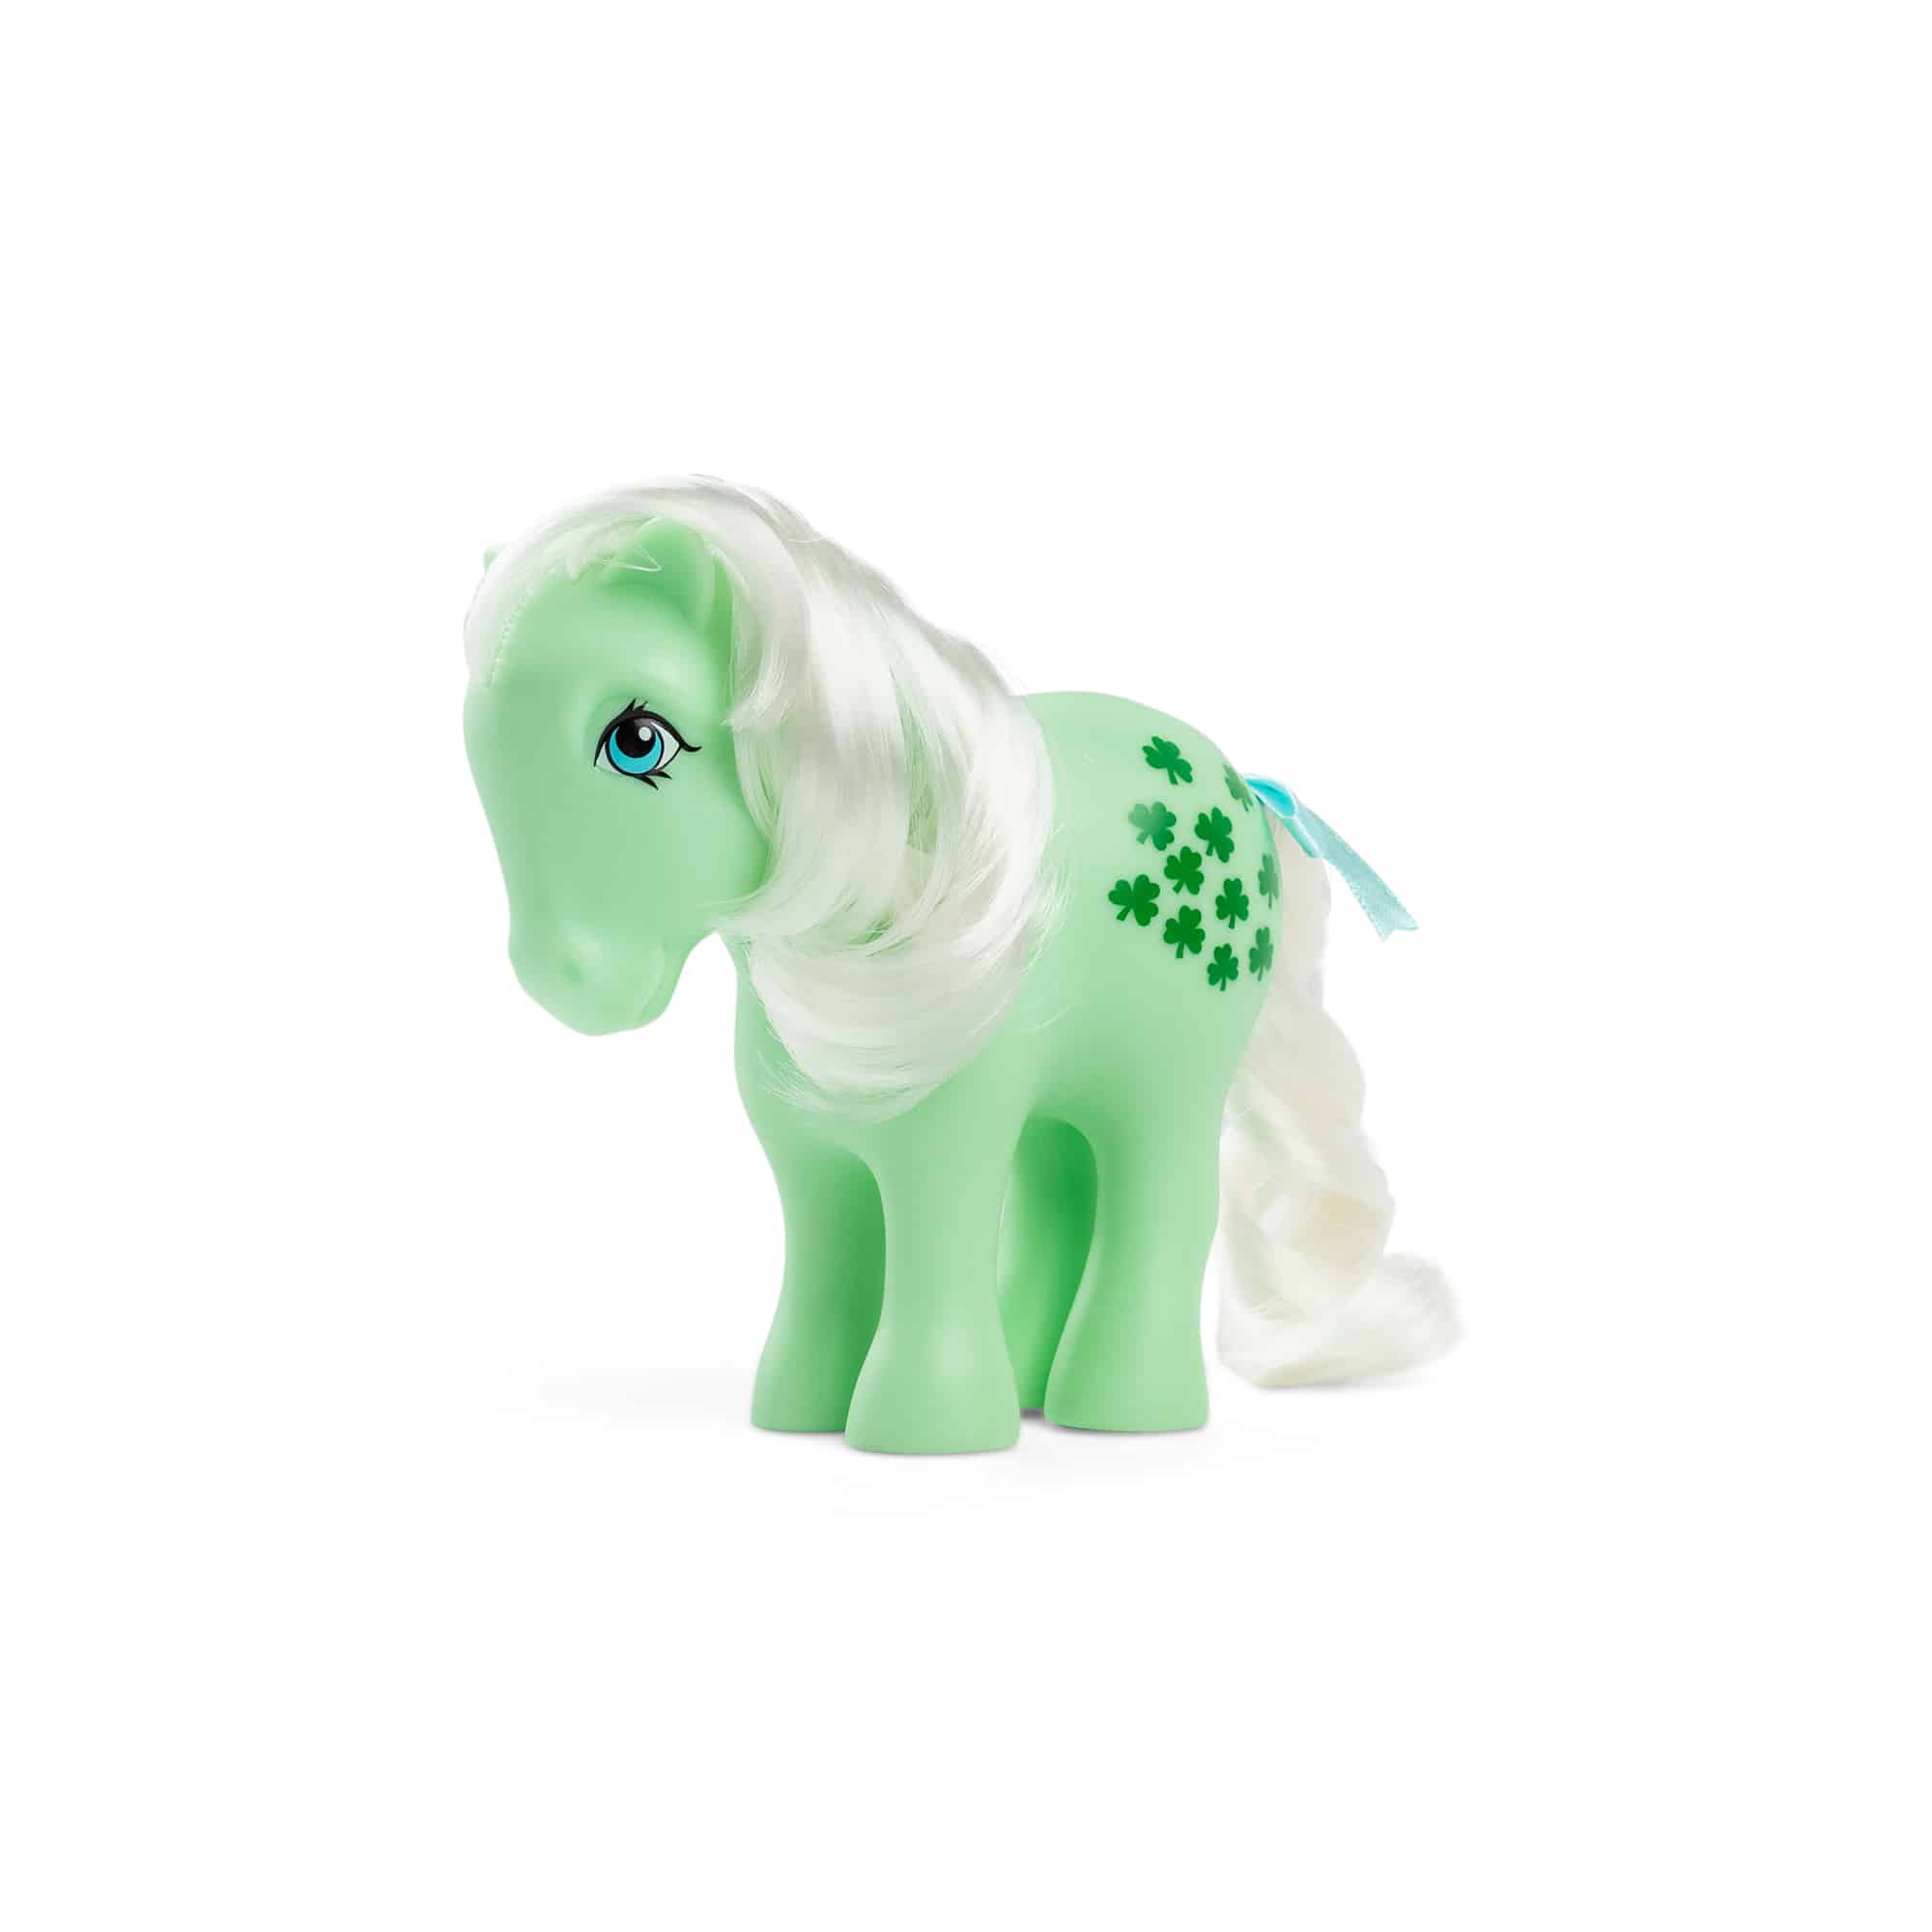 My Little Pony Classic - 4 Collectible - 40th Anniversary Ponies